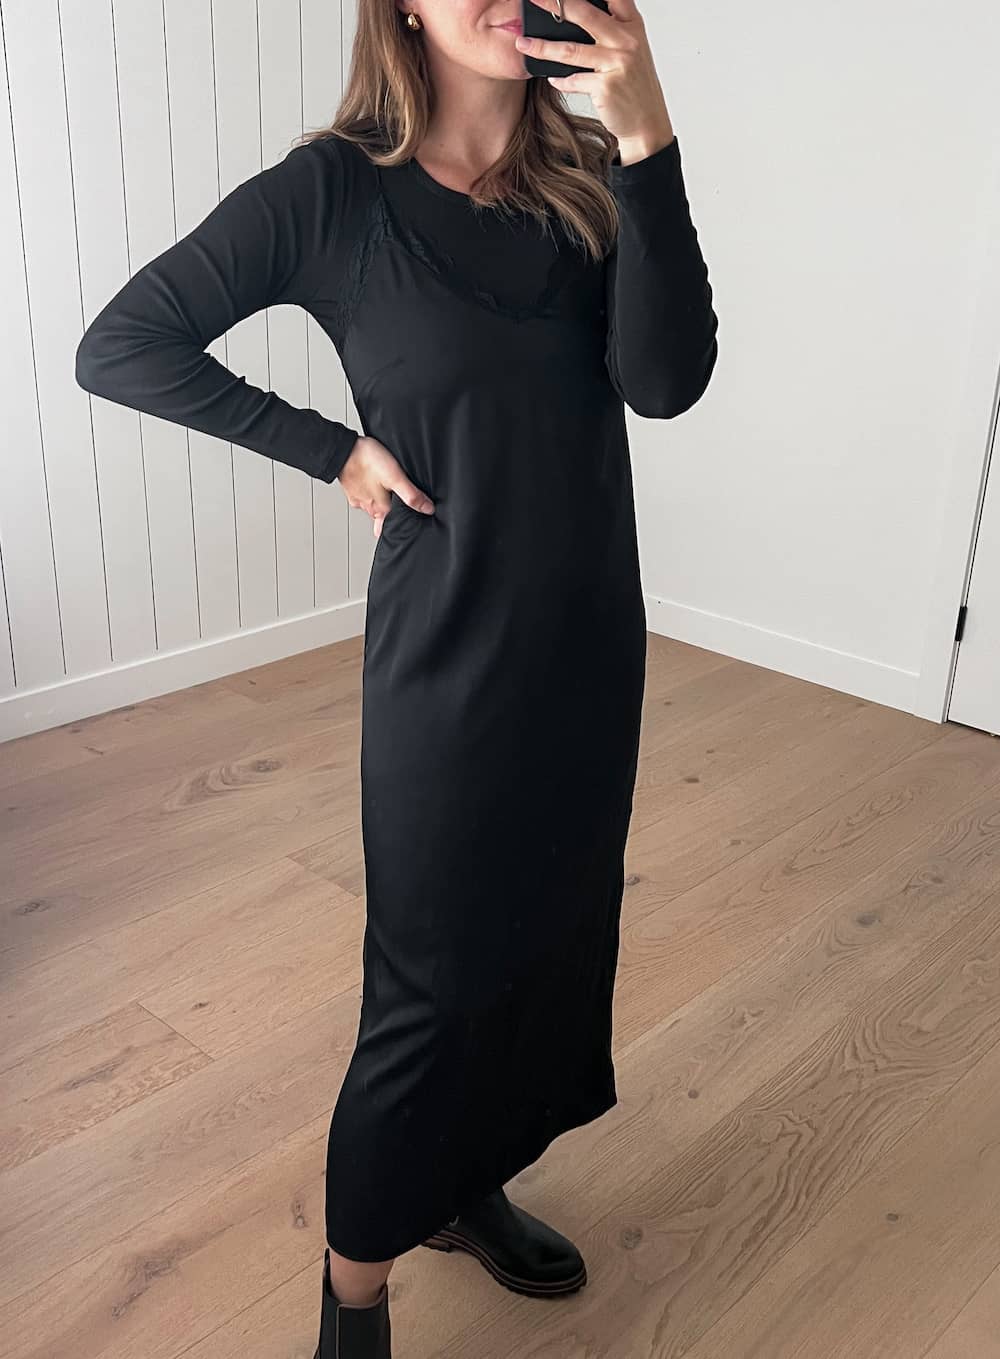 Christal wearing a black slip dress with a long sleeve tee under and black Chelsea boots.